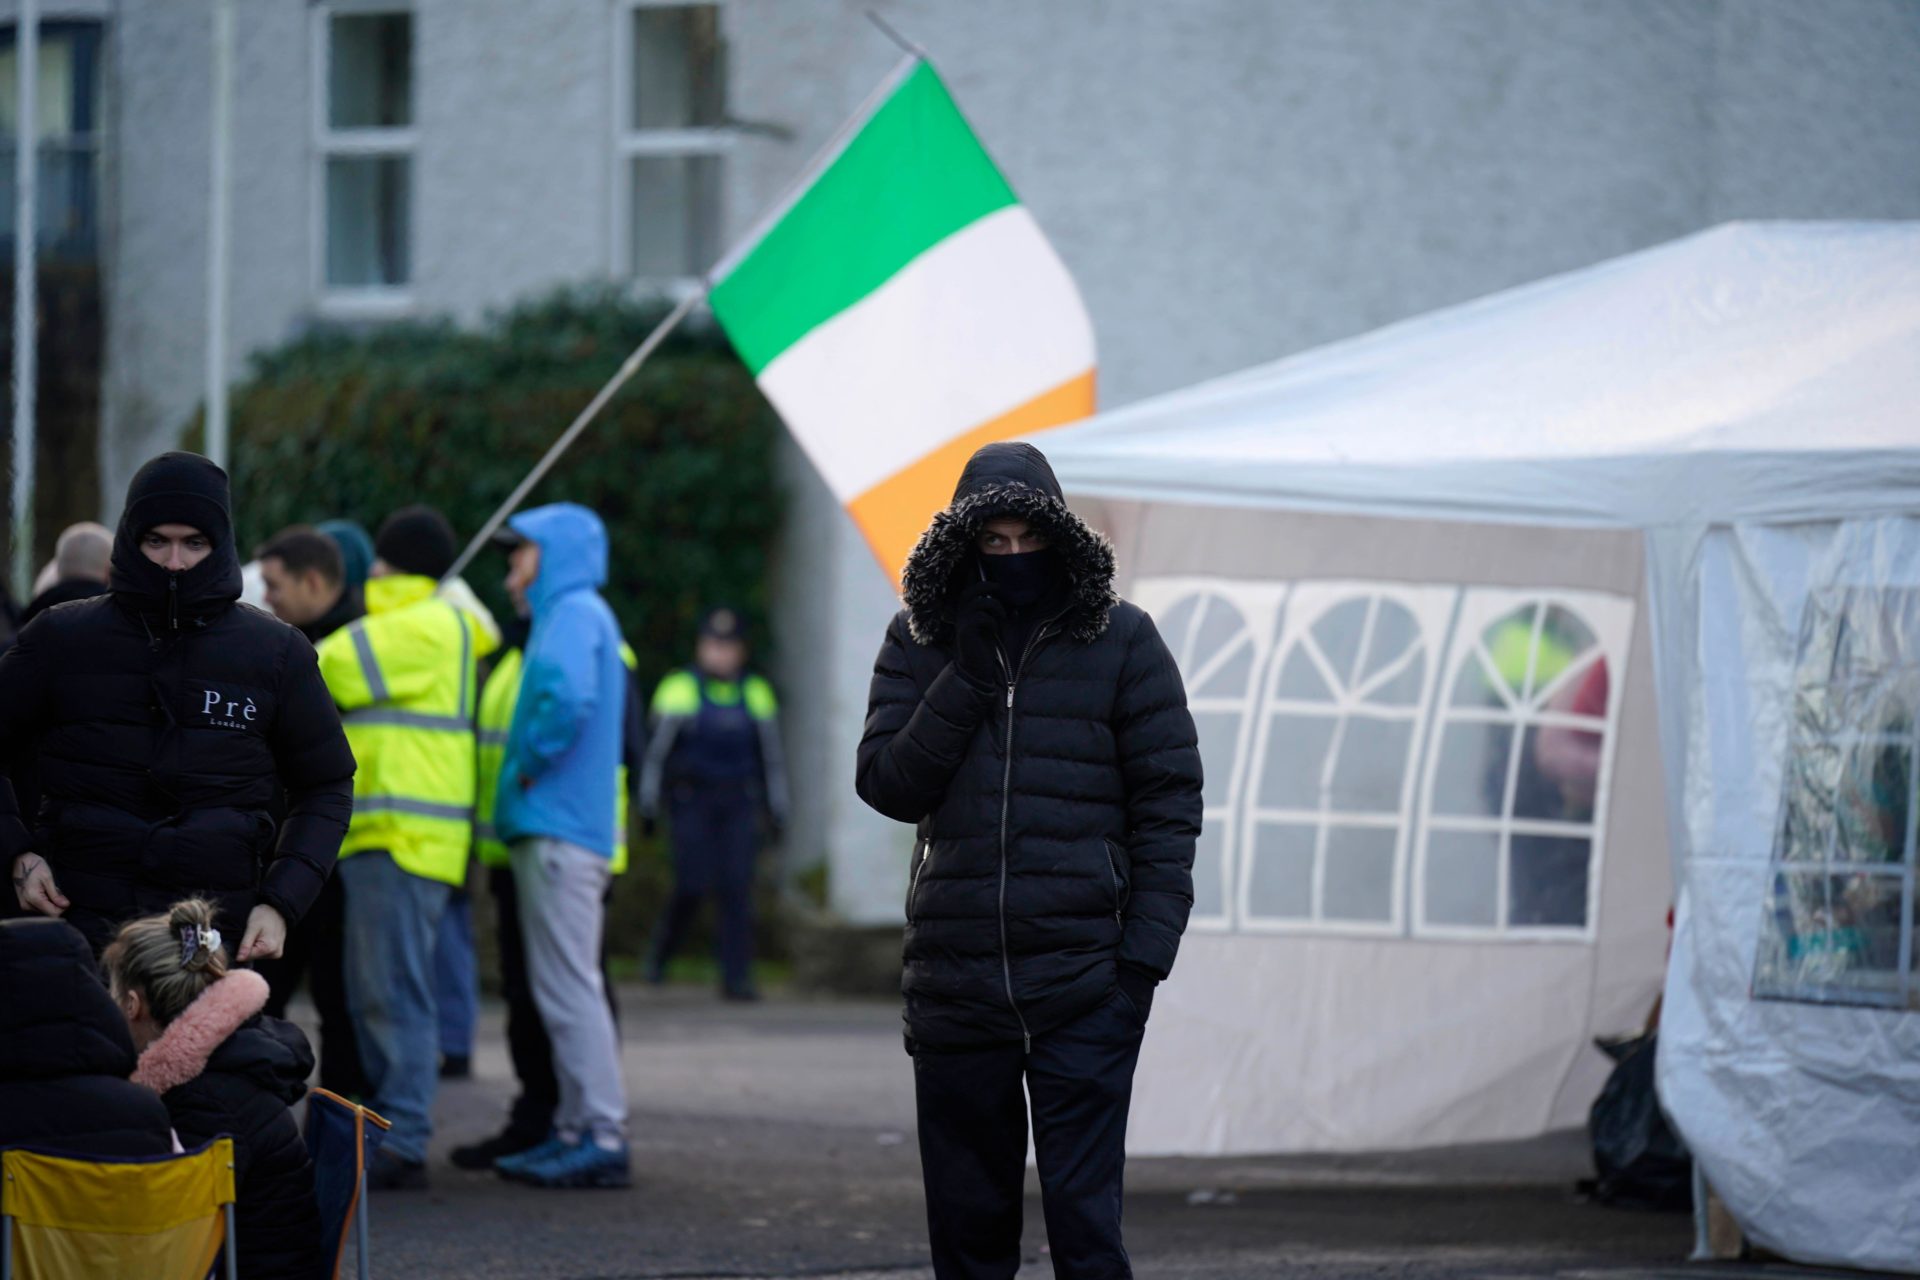 Asylum seeker protesters at the Racket Hall hotel in Roscrea, Co Tipperary